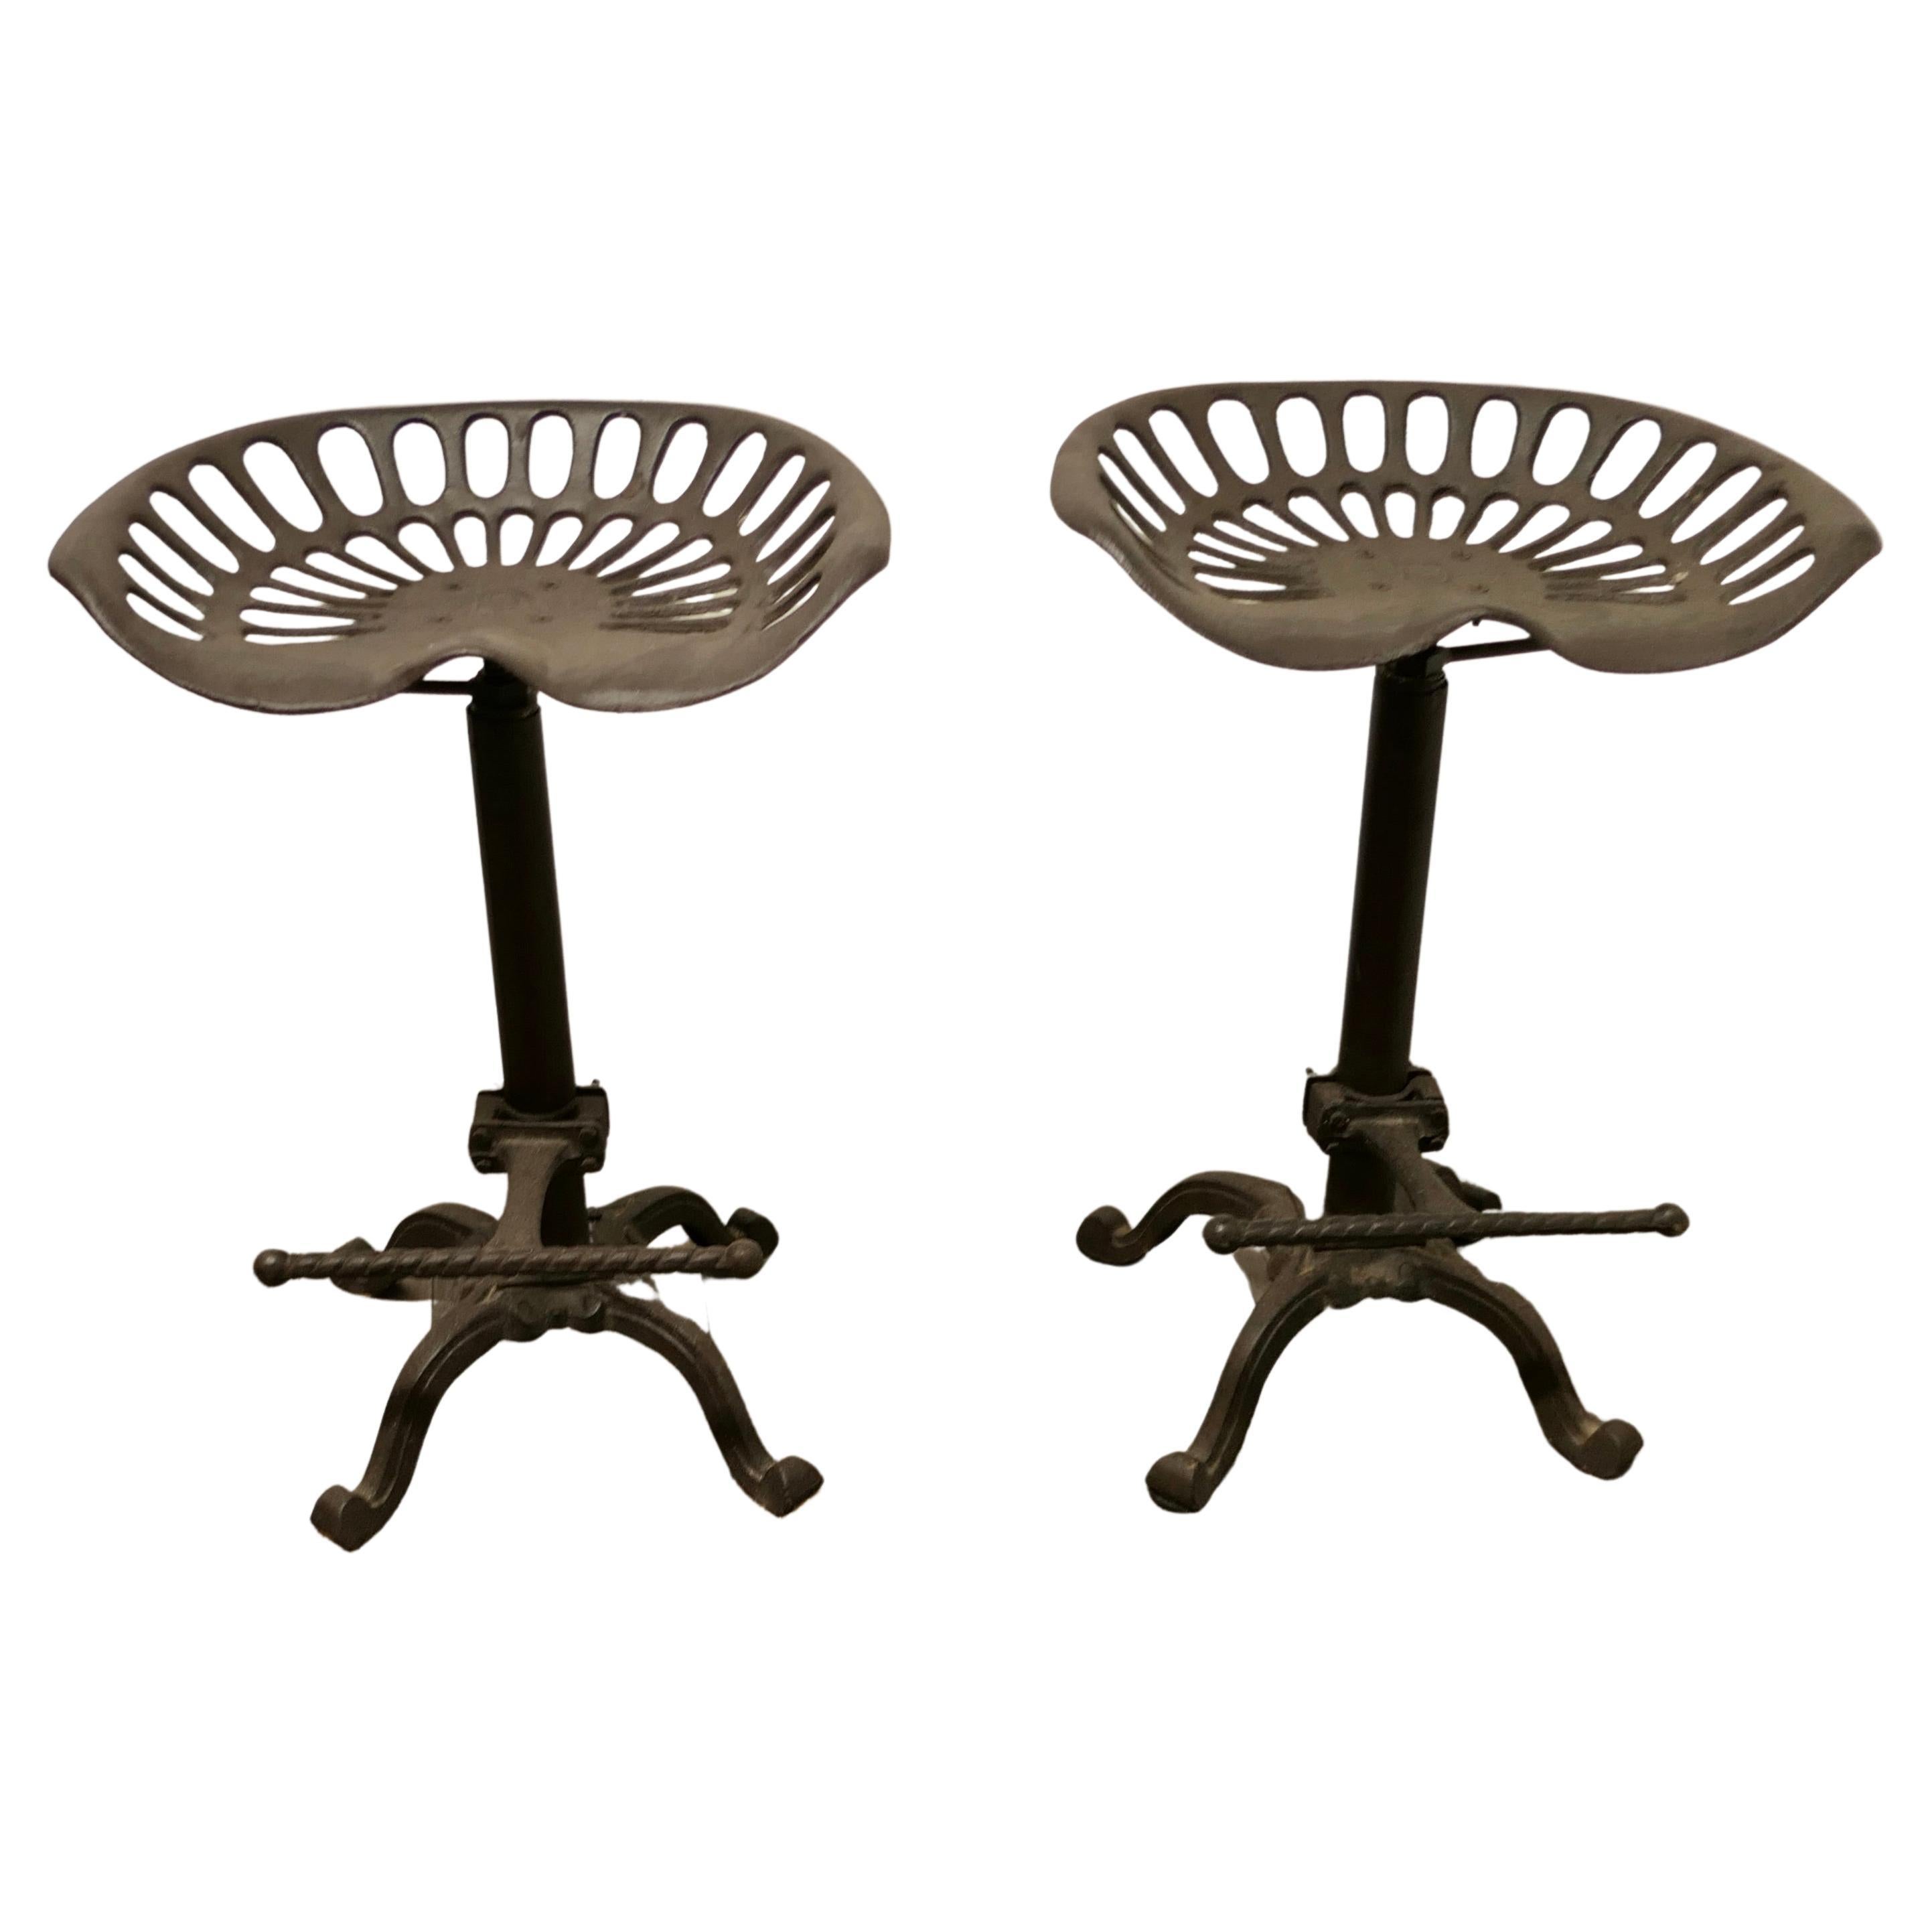 Pair of Quirky Tractor Seat Kitchen/Bar High Stools